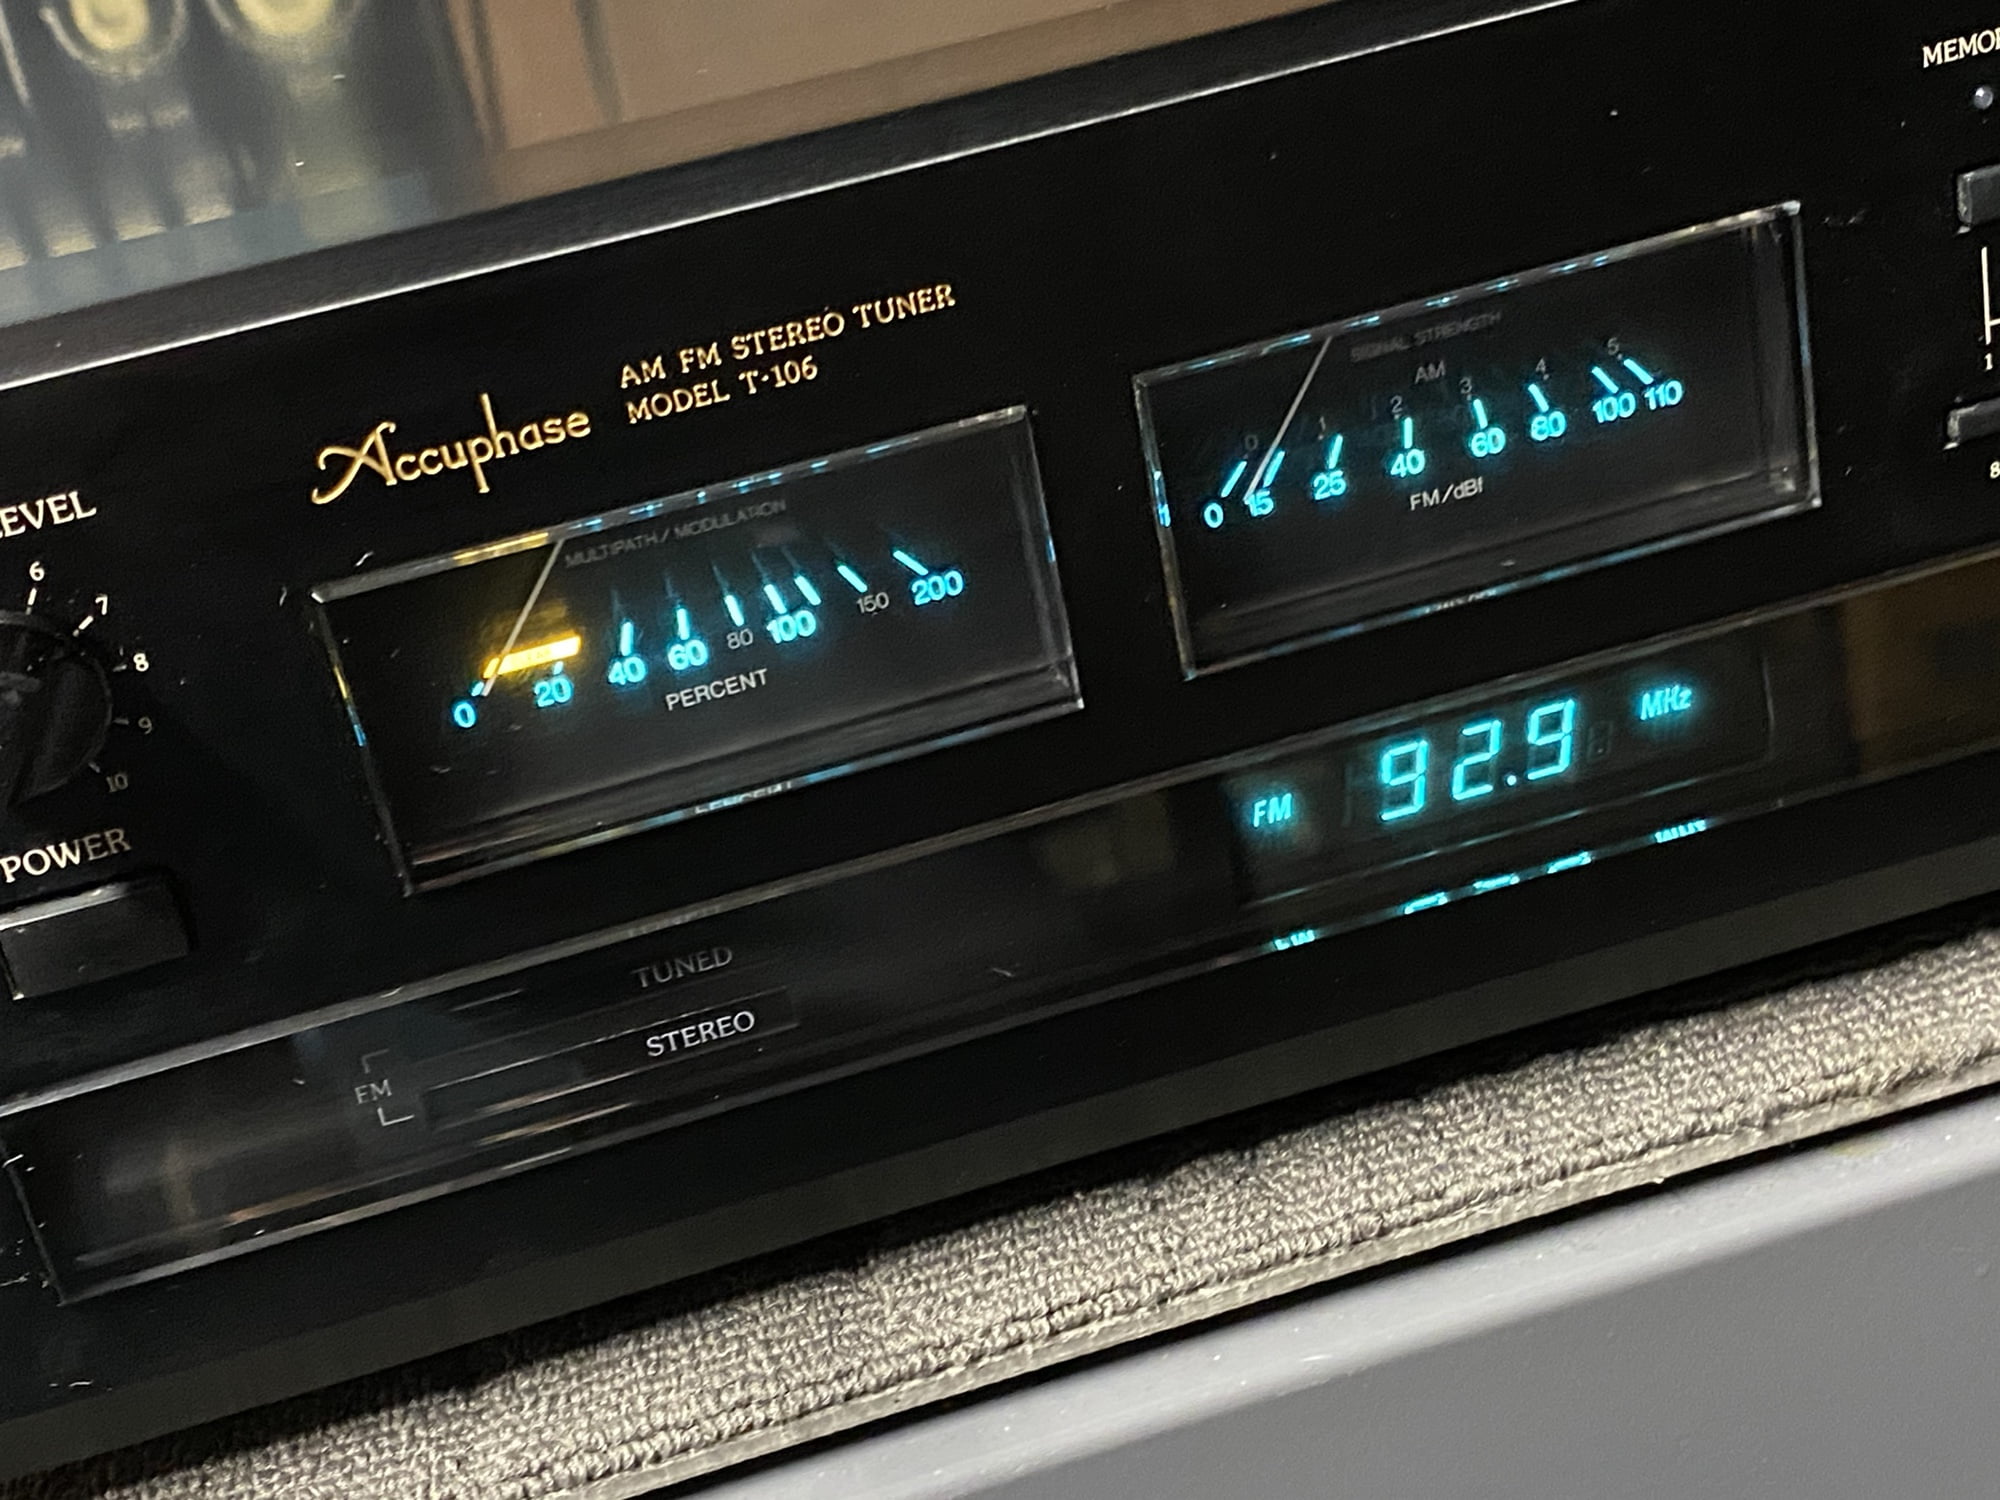 Accuphase T-106 